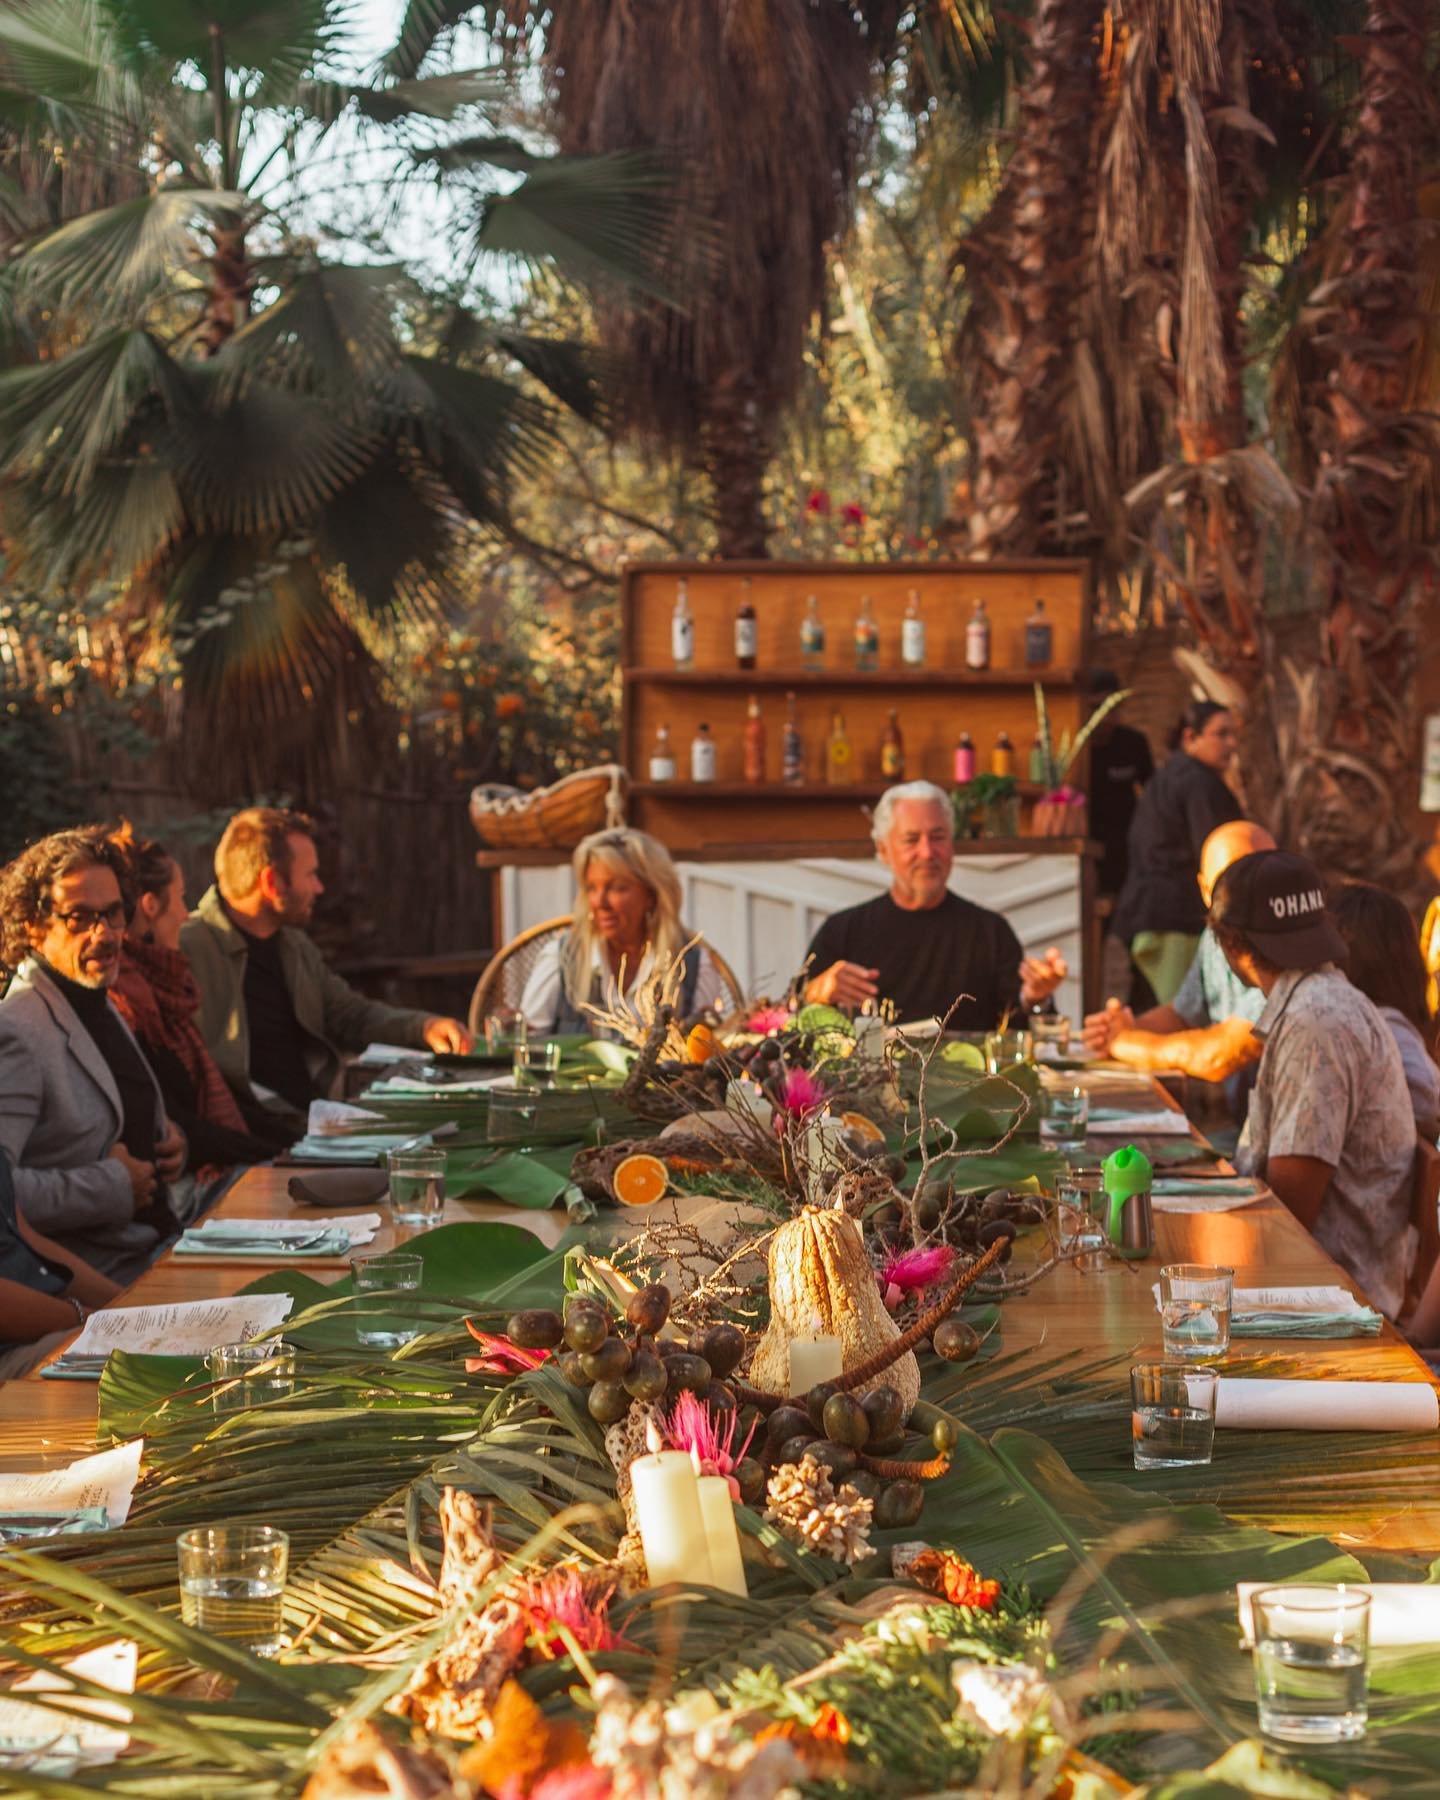 Last week, under (cien) palms, an intimate dinner experience unlike any other. The &ldquo;Tierra Inc&oacute;gnita,&quot; dinner series inspired by the Peric&uacute;es, the original settlers of Baja California Sur.
Created by our incredible partners, 